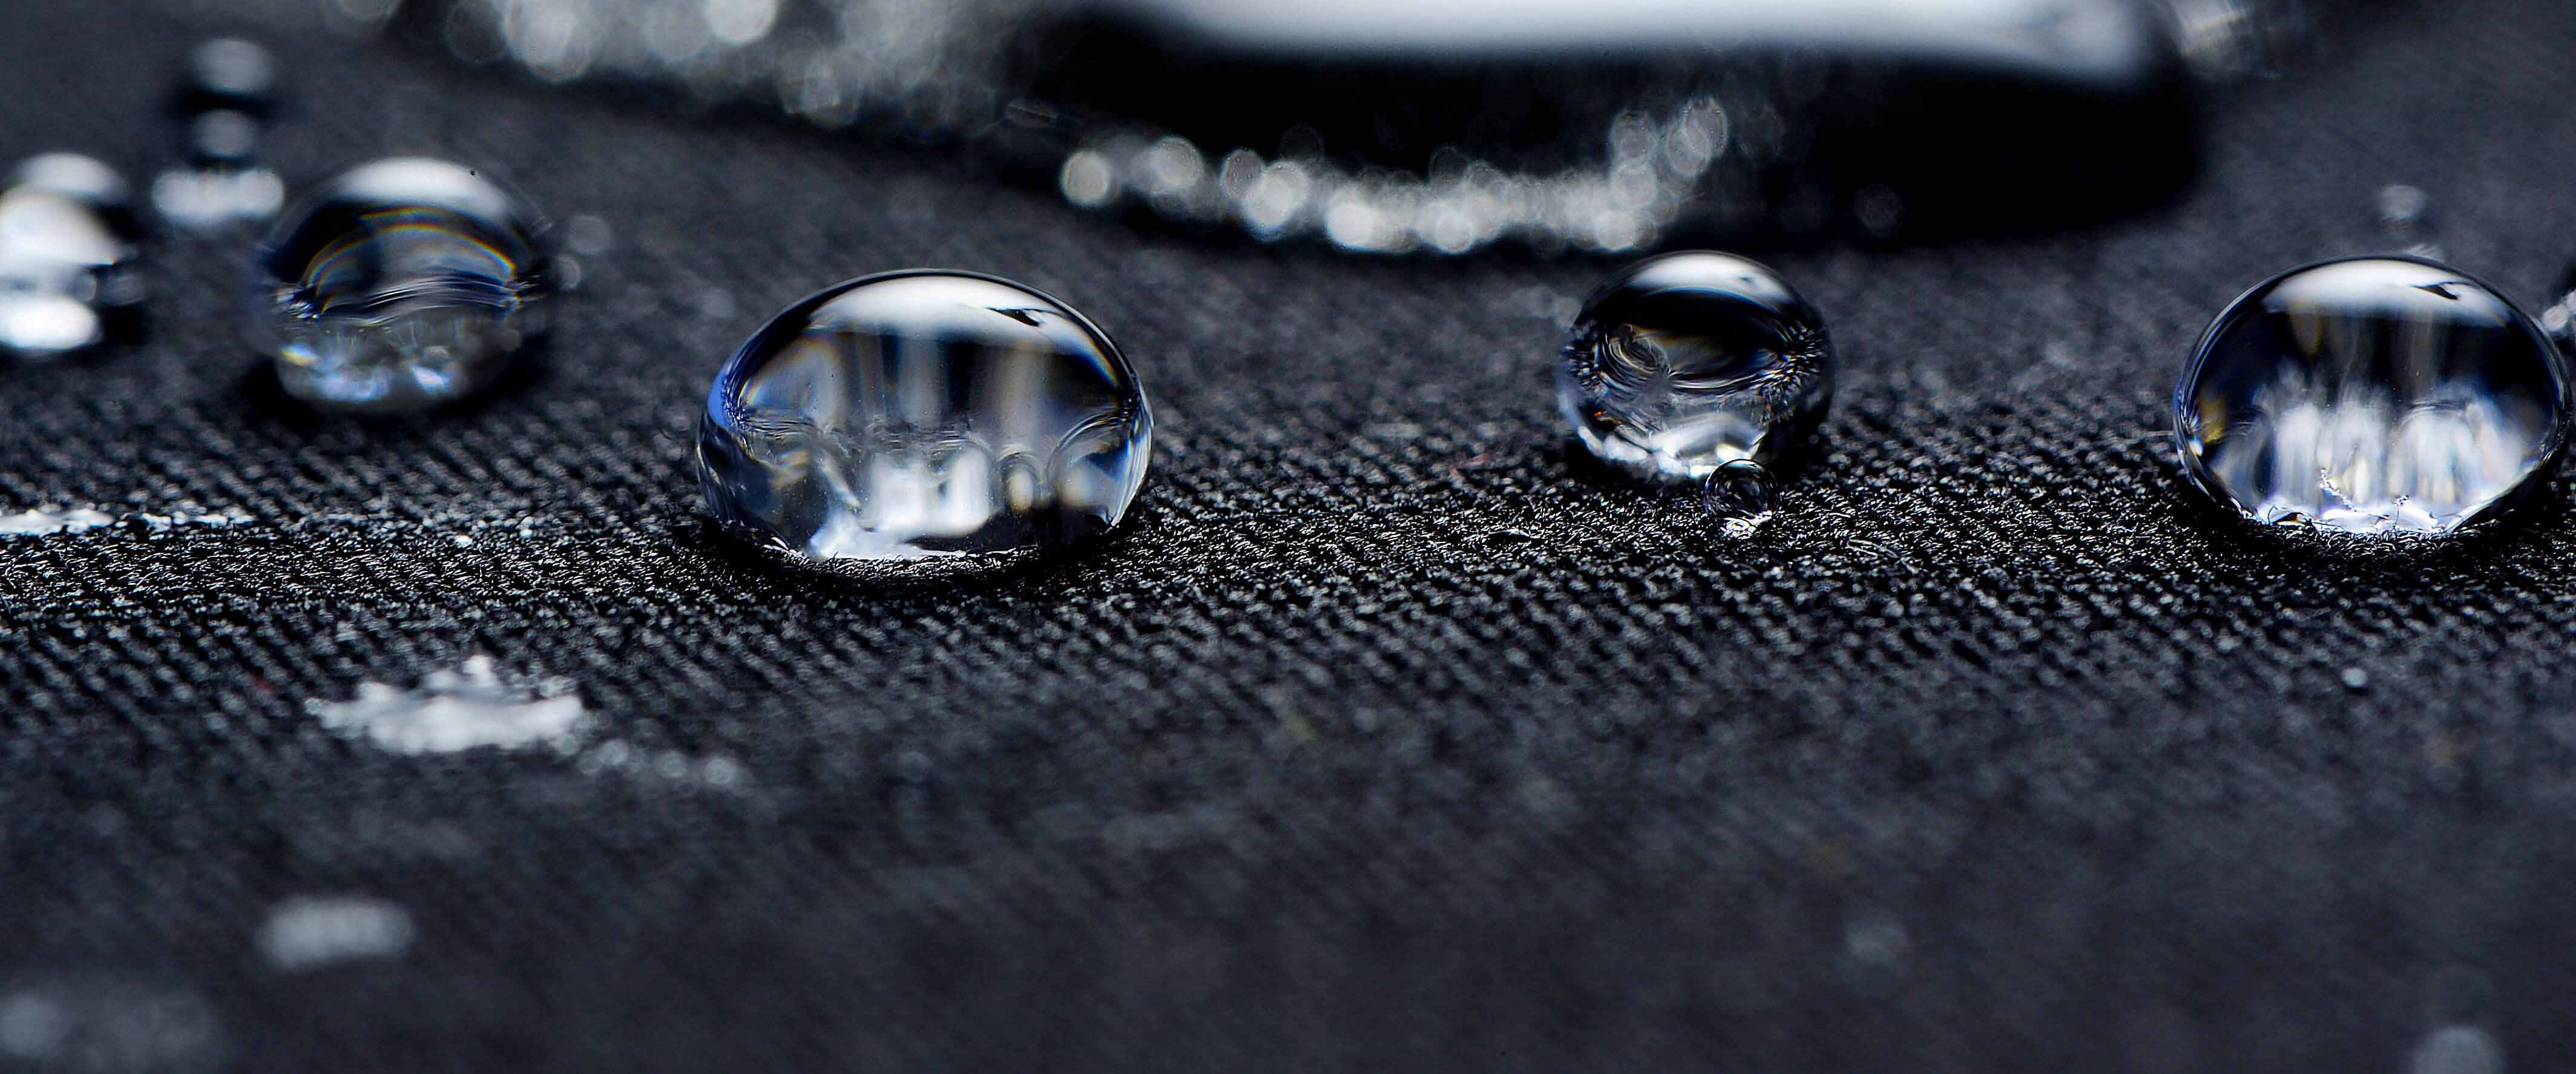 Water repellent fabric magnified